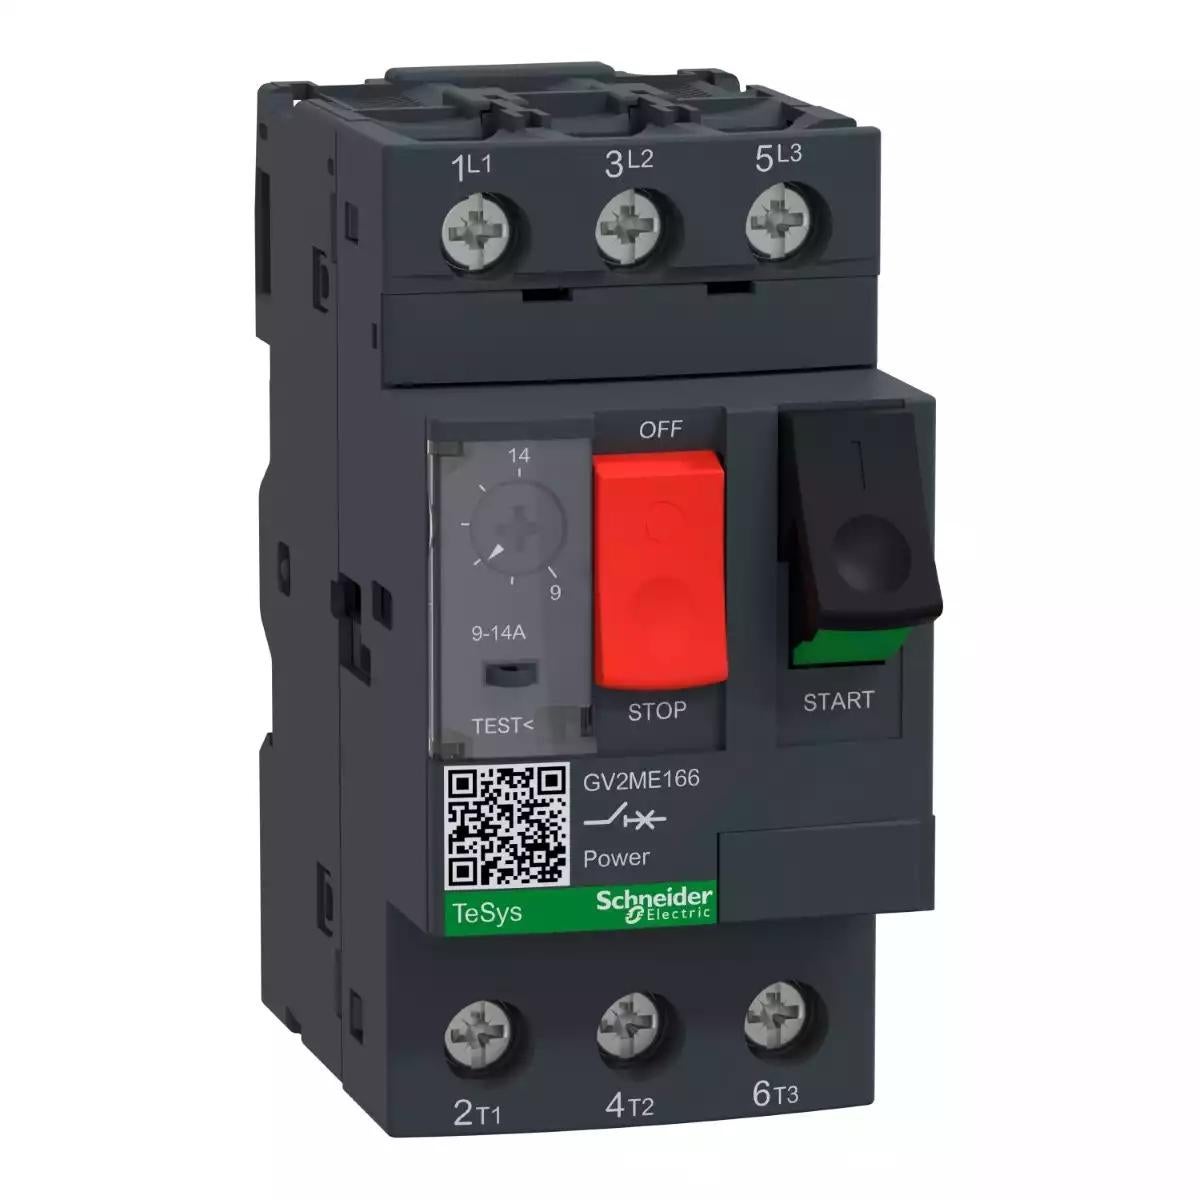 TeSys Deca frame 2, Motor Circuit Breaker, 3P, 9-14A, Thermal Magnetic, Push Button, Lugs Terminals